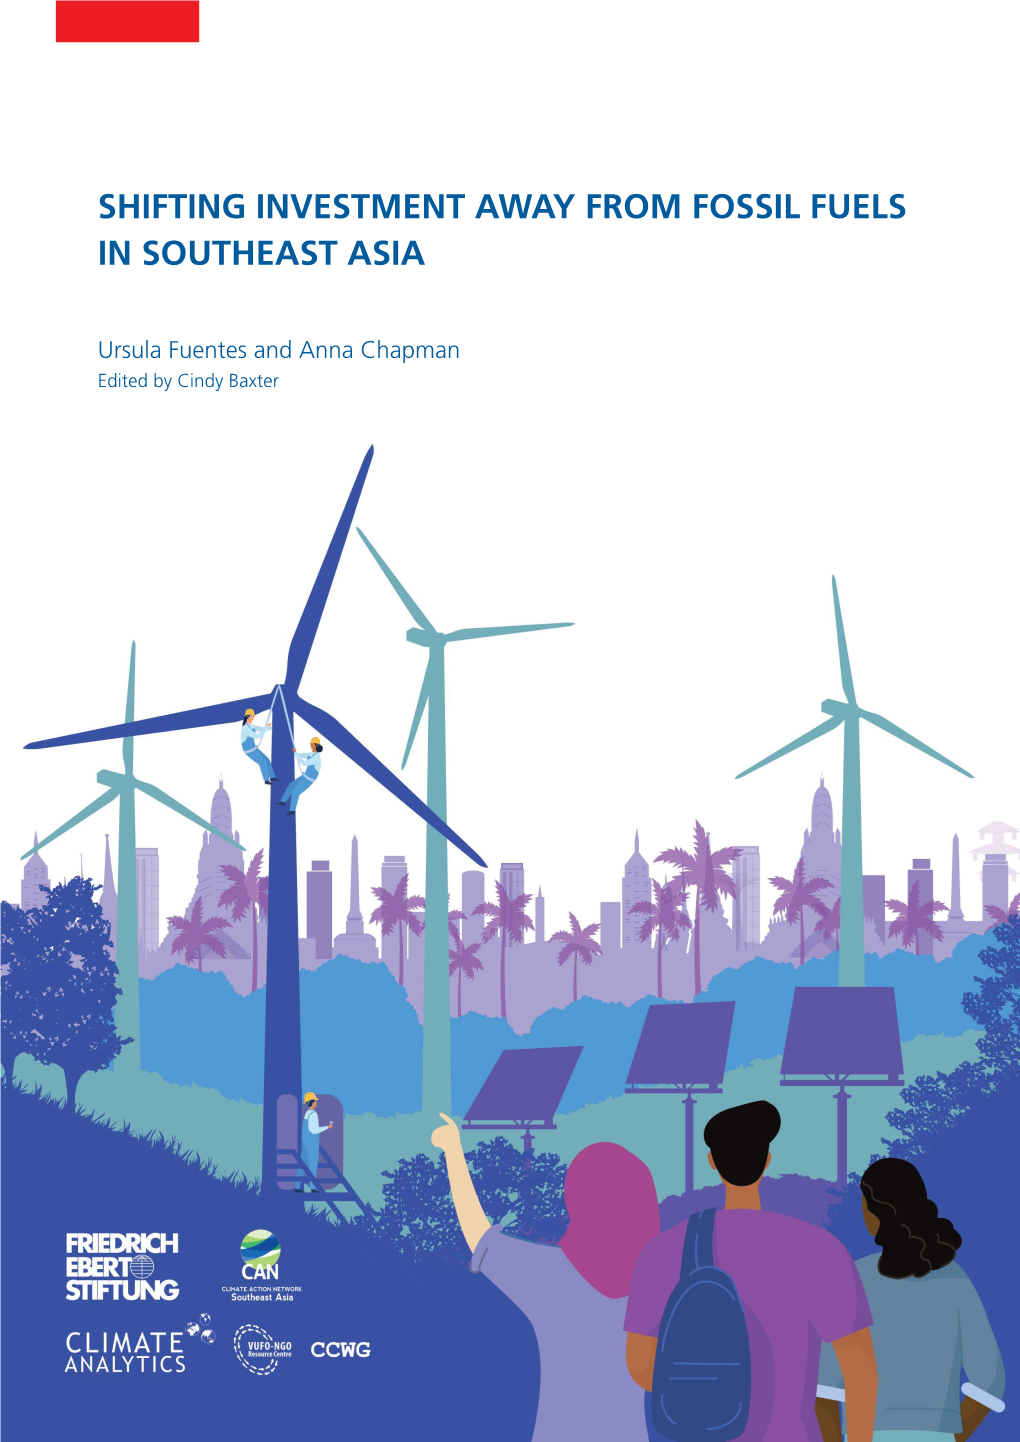 Shifting Investment Away from Fossil Fuels in Southeast Asia